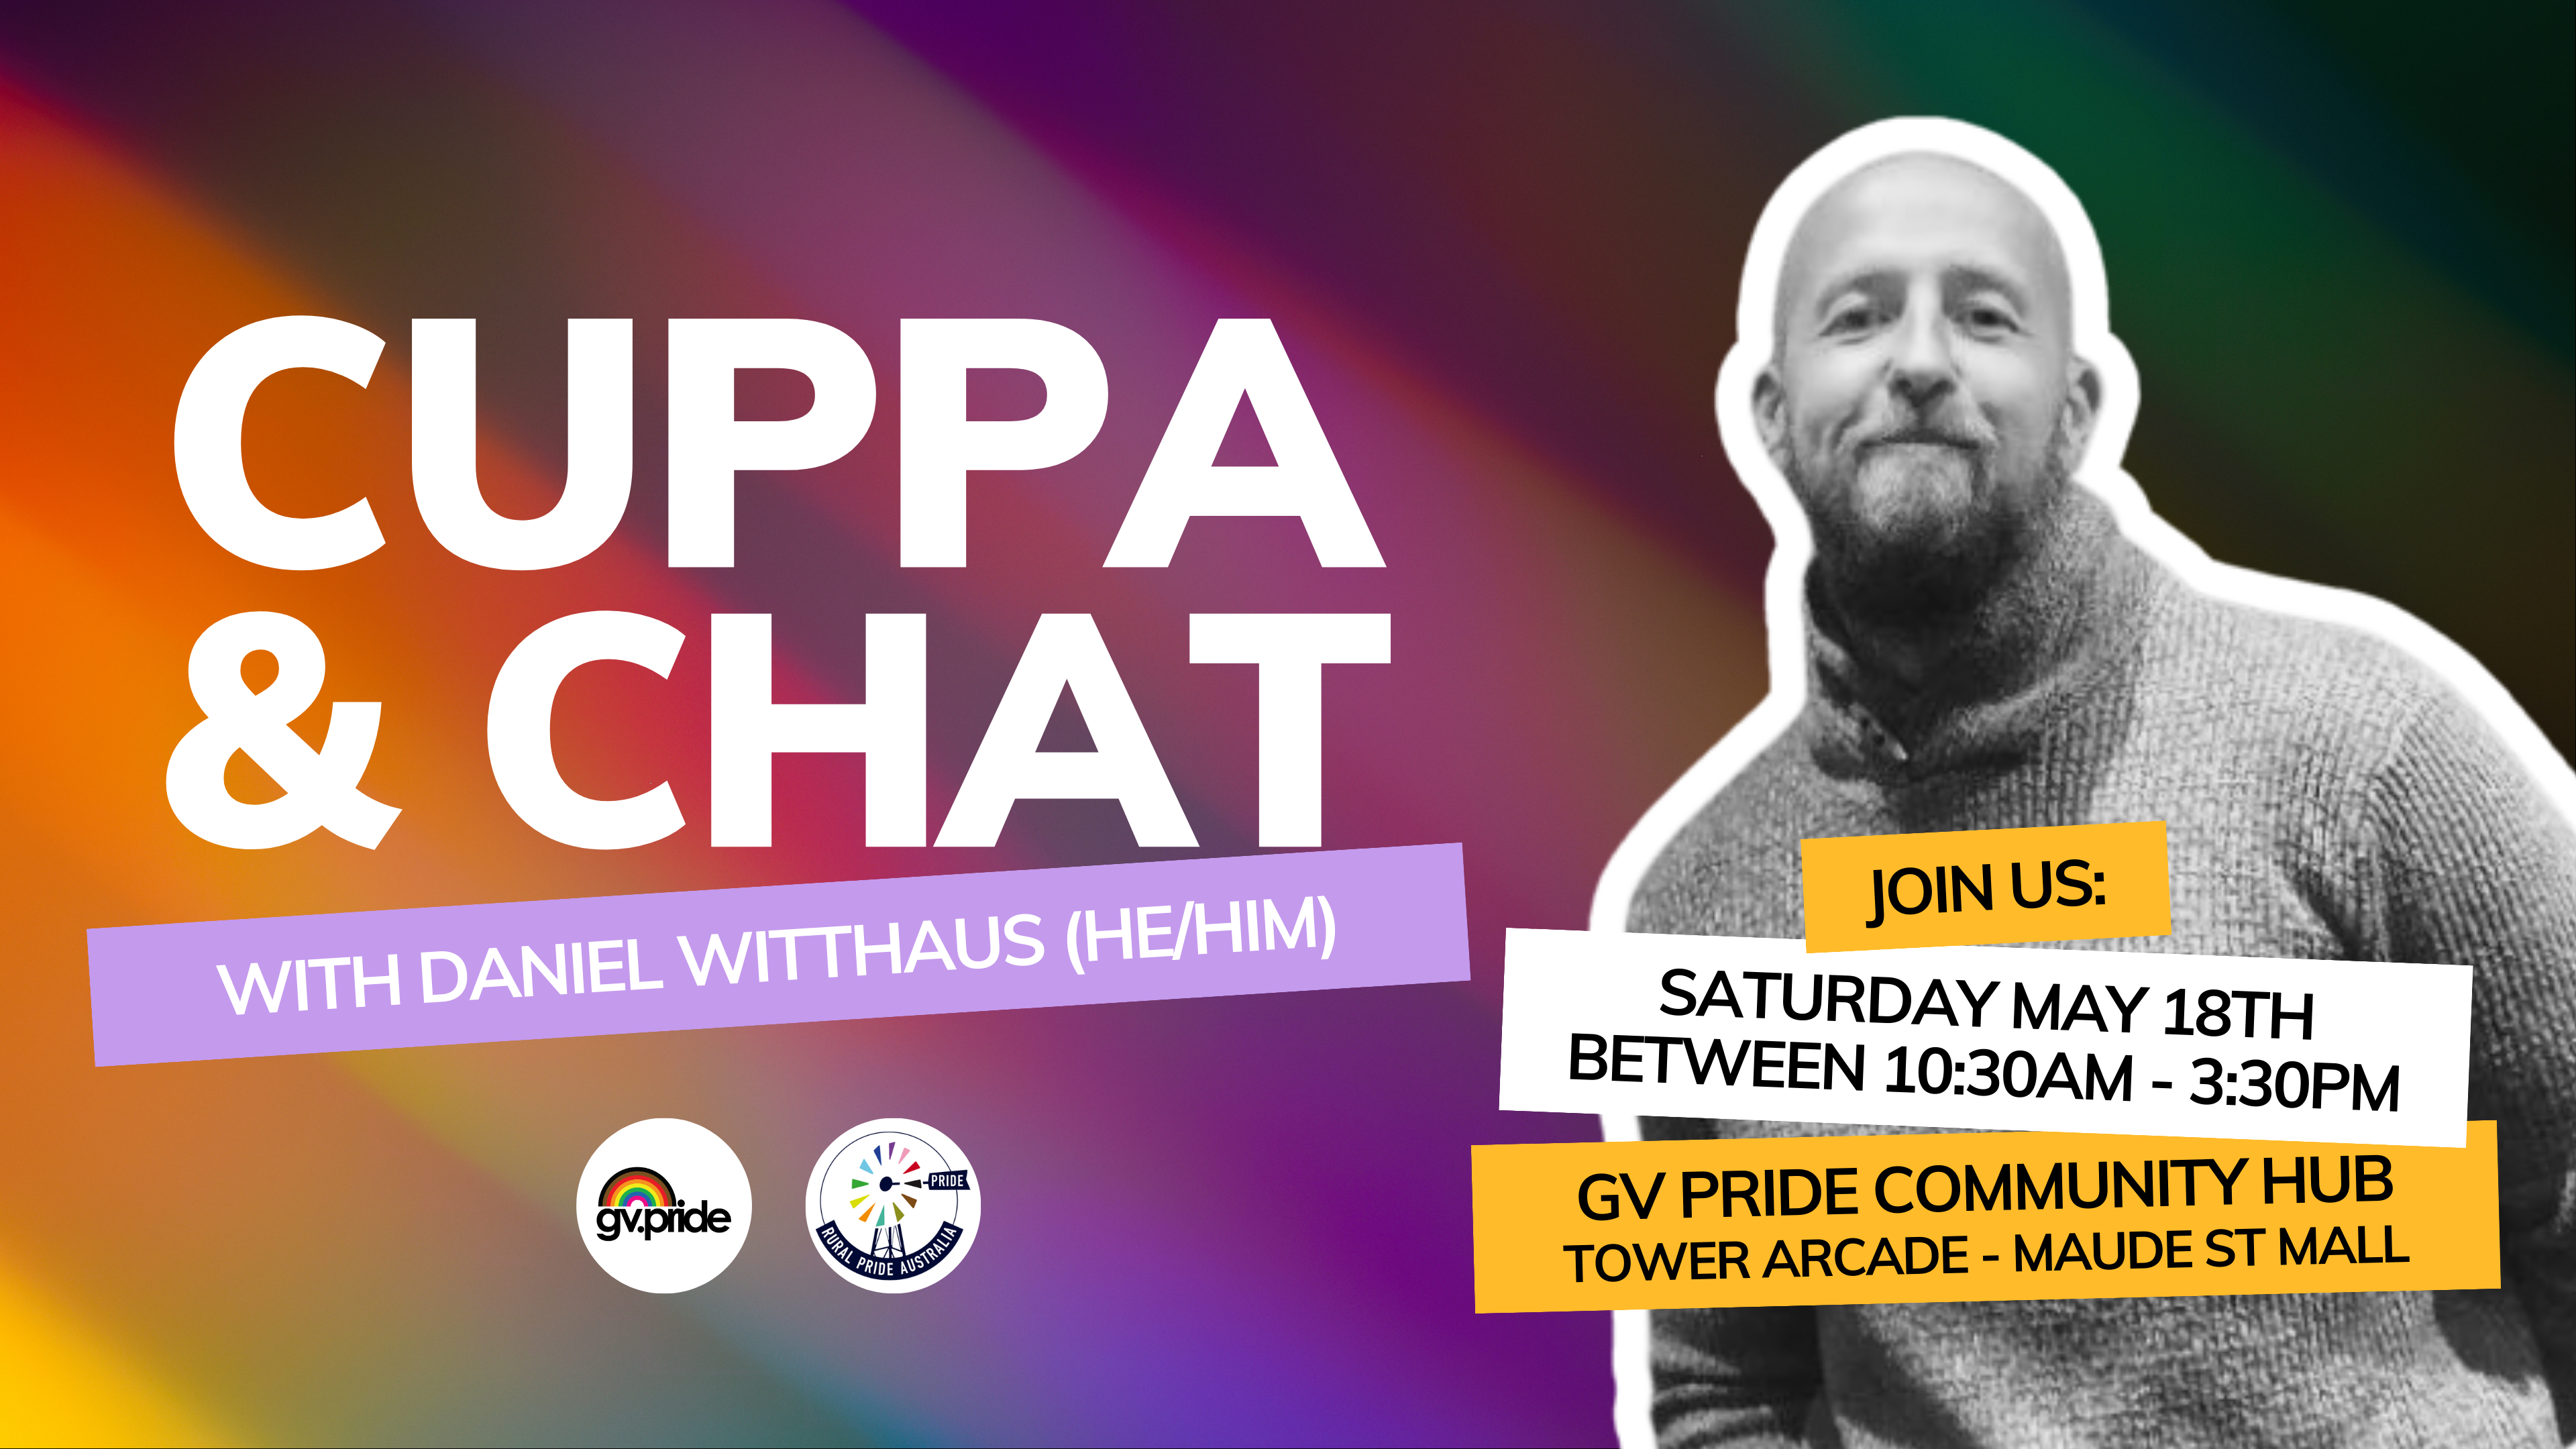 On the right of the image is a black and white photo of Daniel Witthaus (he/him), a white, cis-gay man with limited hair on top of his head but luscious facial hair. Daniel is wearing a knitted sweater and smiling. On the left of the image is bold white text outlining the name of the event: ‘Cuppa & Chat with Daniel Whitthaus (he/him)’. To the right of the image, there is black text outlining the event date, time and location. The background of this image is rainbow.